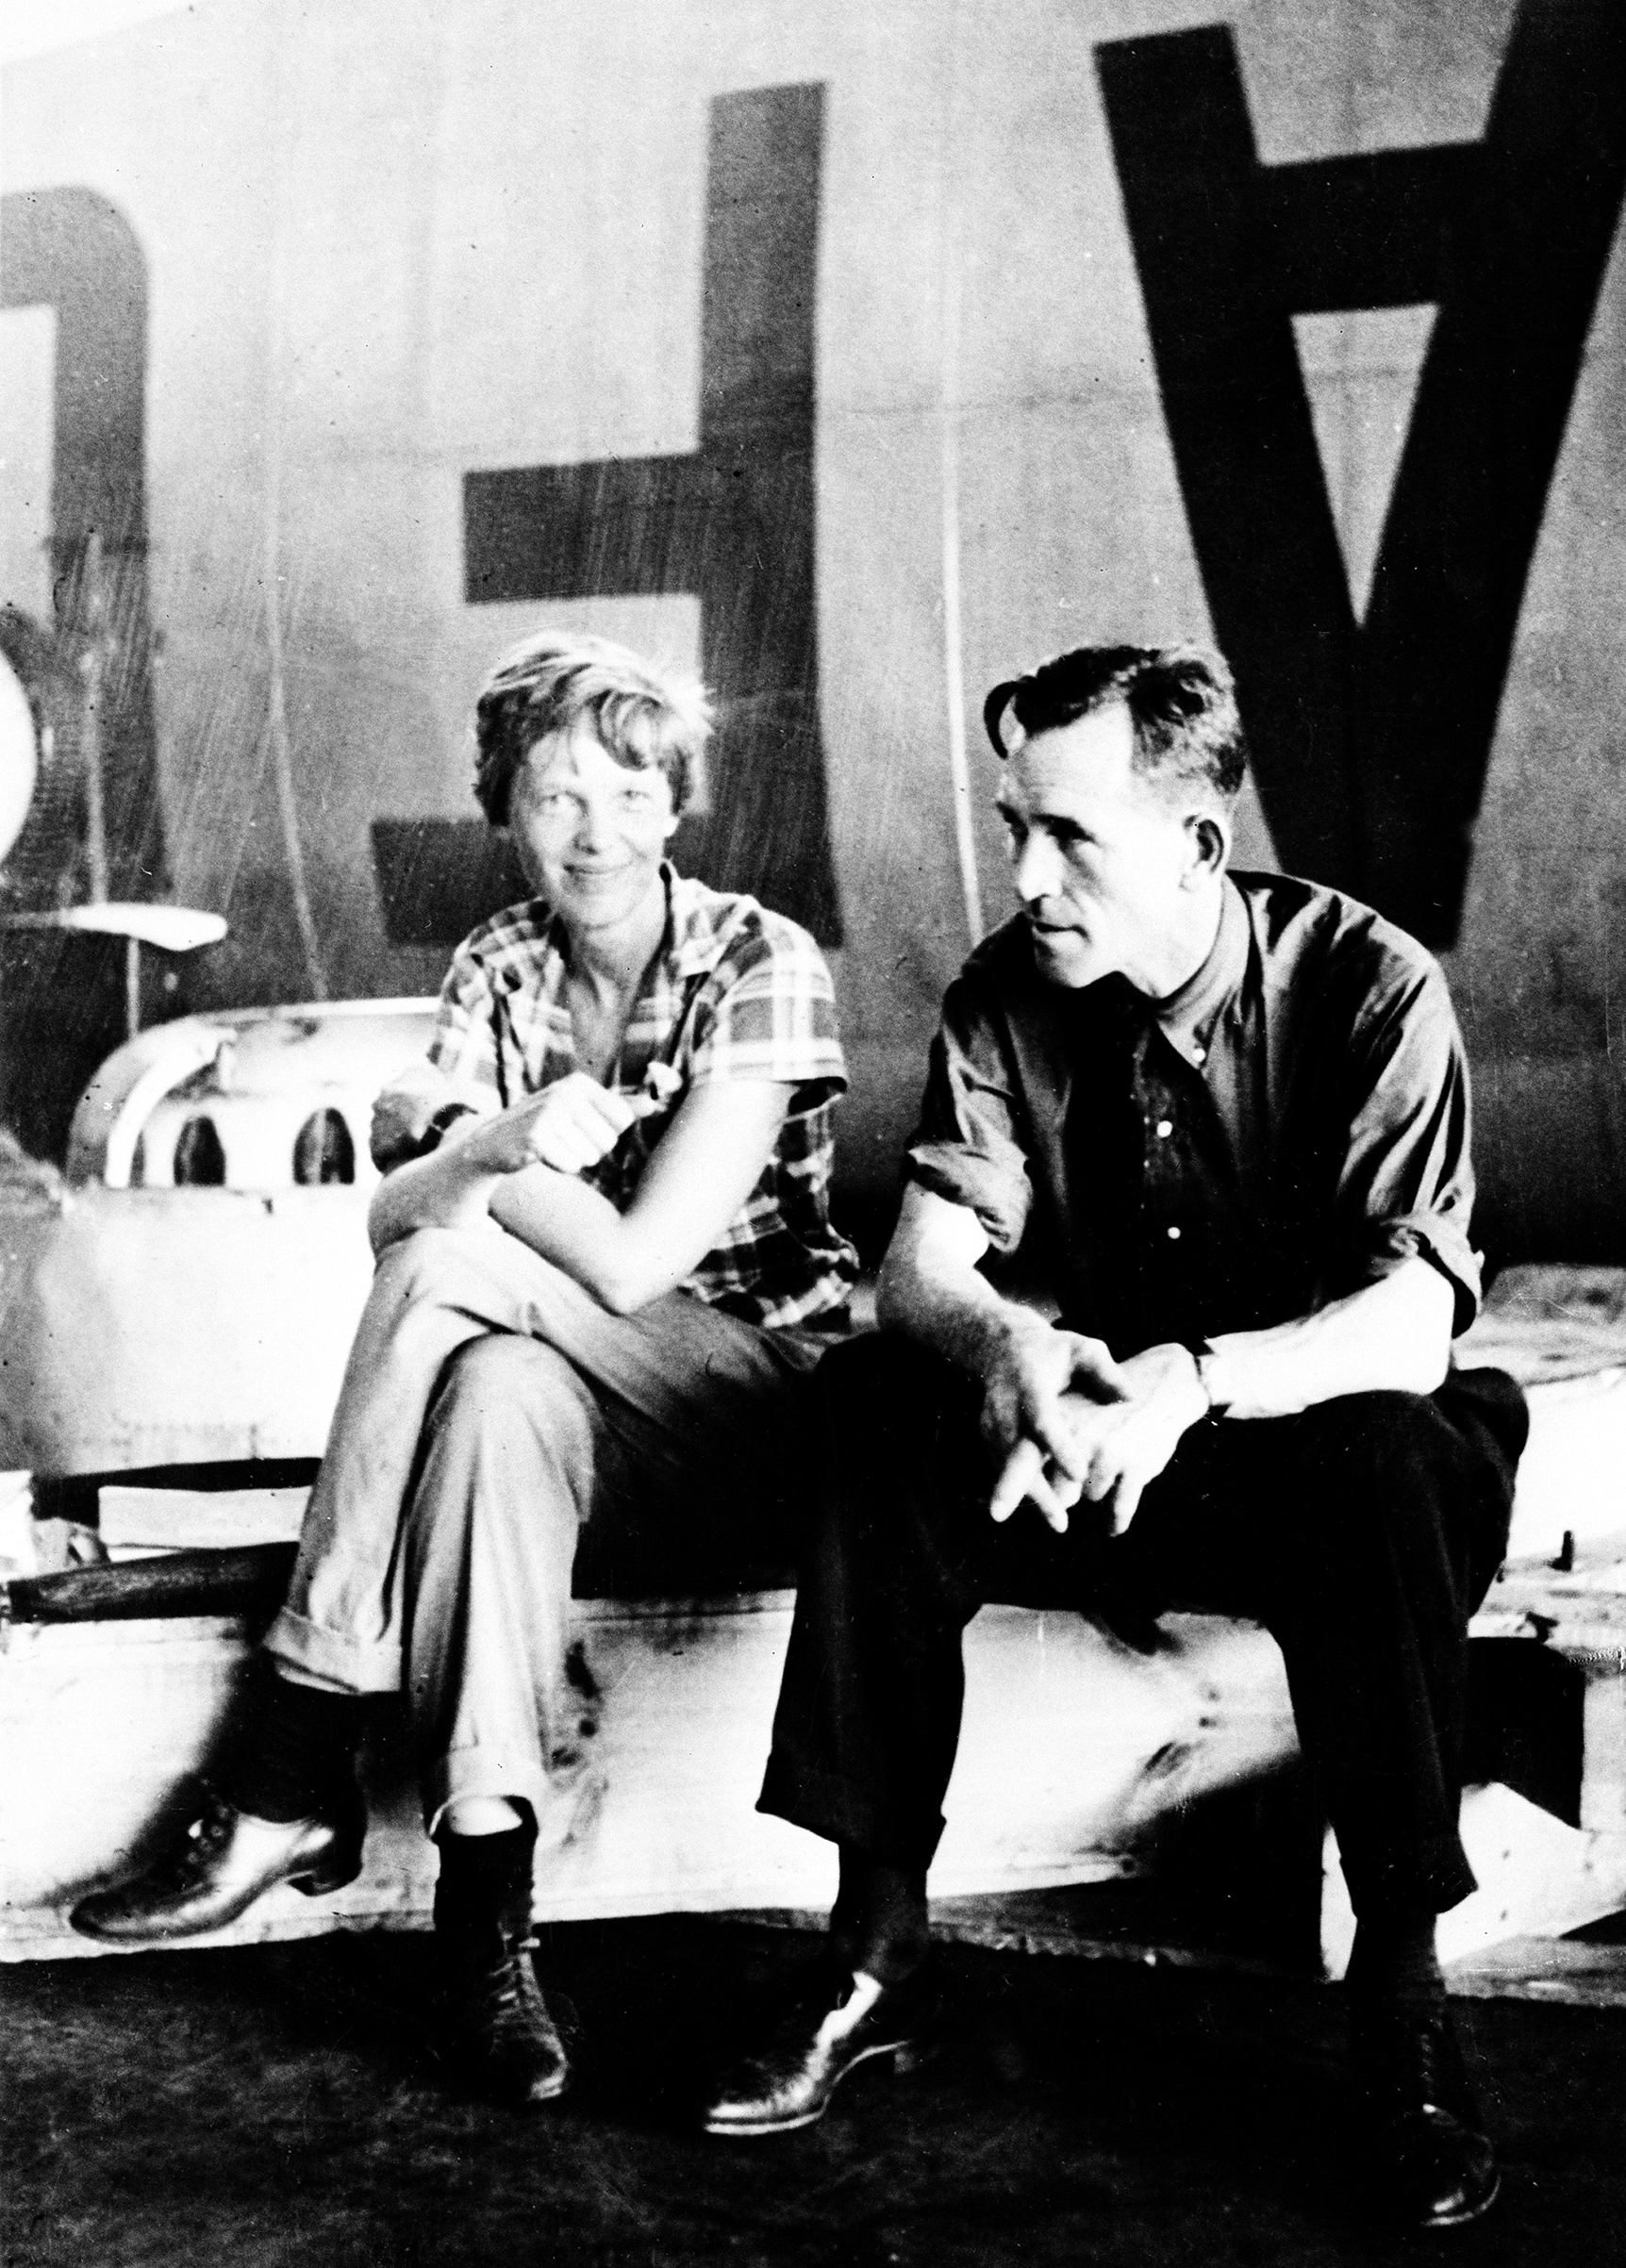 Amelia Earhart Putnam and her navigator Fred Noonan are seen shortly after their landing in Bandoeng, near Batavia in the Dutch East Indies, on June 21, 1937. It was one of the last happy landings on their attempted round-the-world flight before they disappeared on July 2, under way to Howland Island, somewhere over the Pacific Ocean.